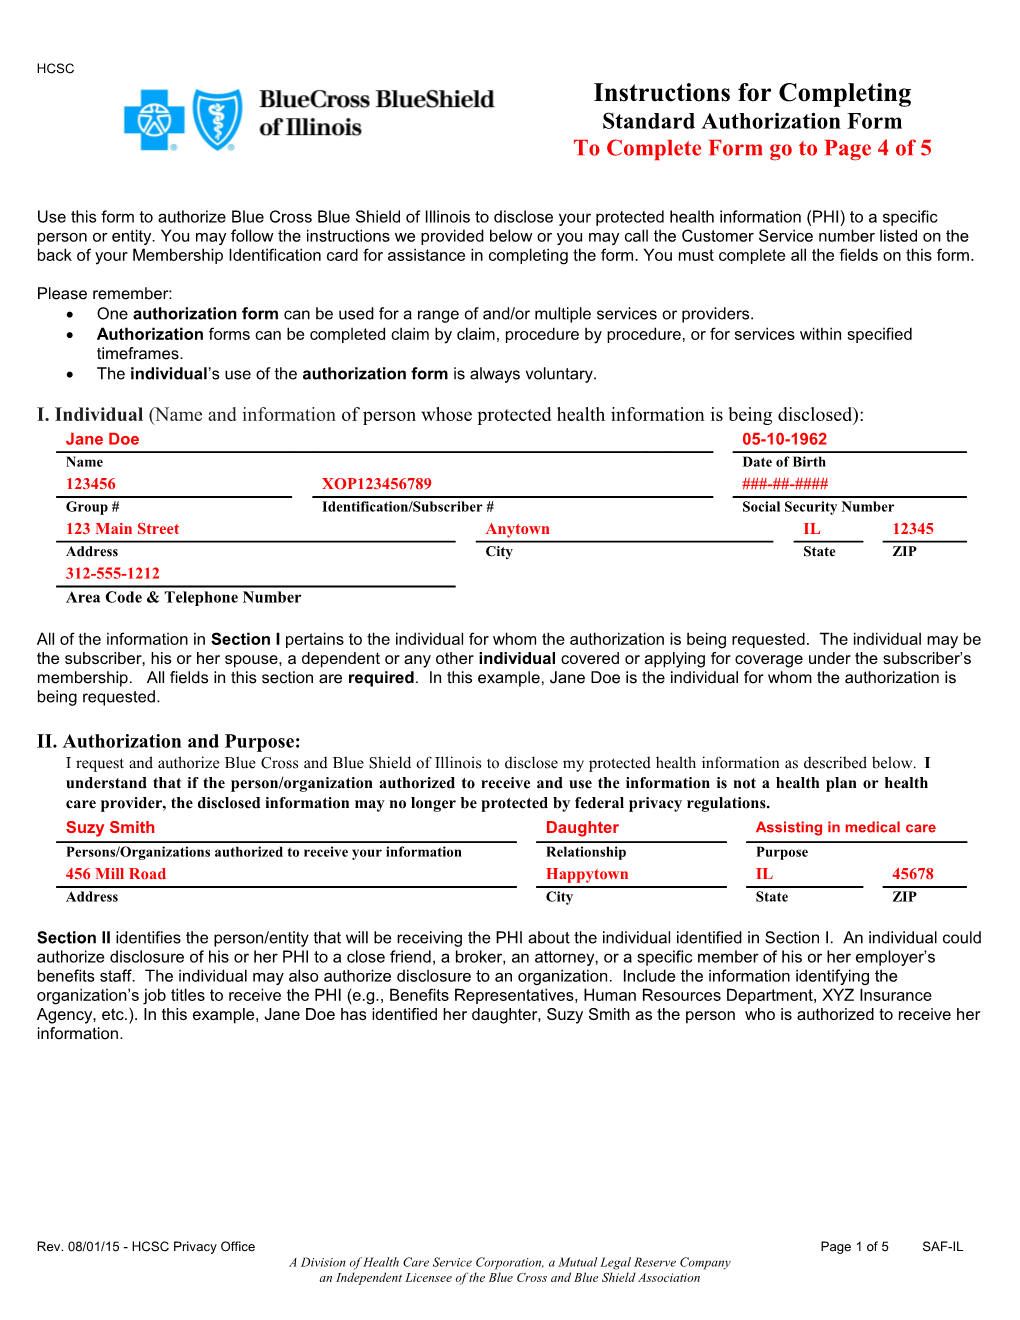 Instructions for Completing the Standard Authorization Form (SAF)